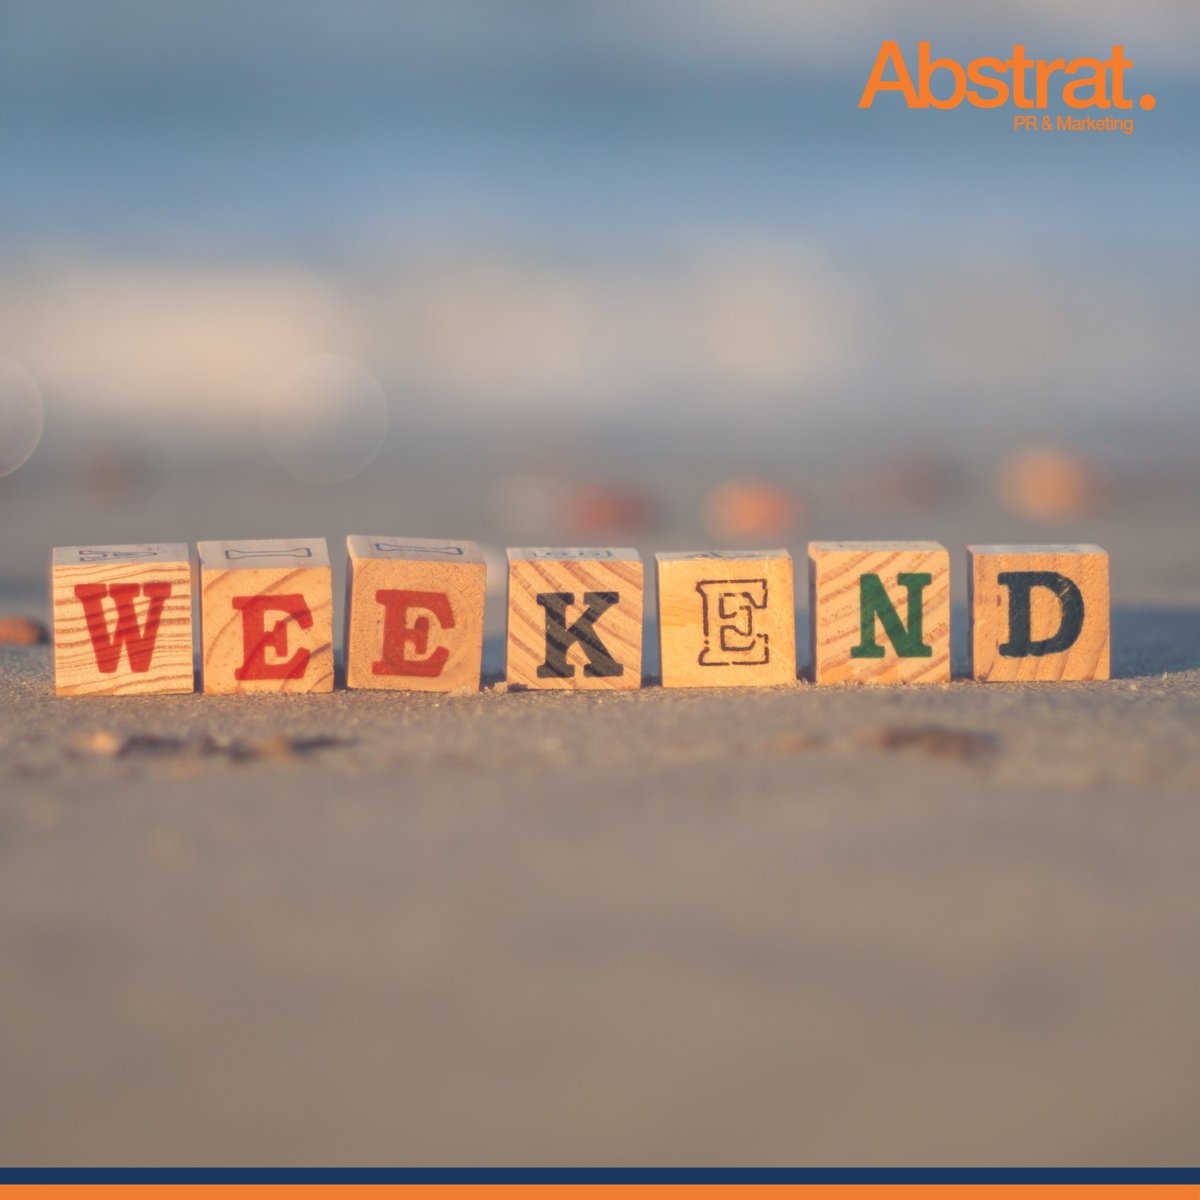 The weekend is like a breath of fresh air. Take a deep breath and enjoy the moment.
#weekend #weekendvibes #abstrat #abstrattz